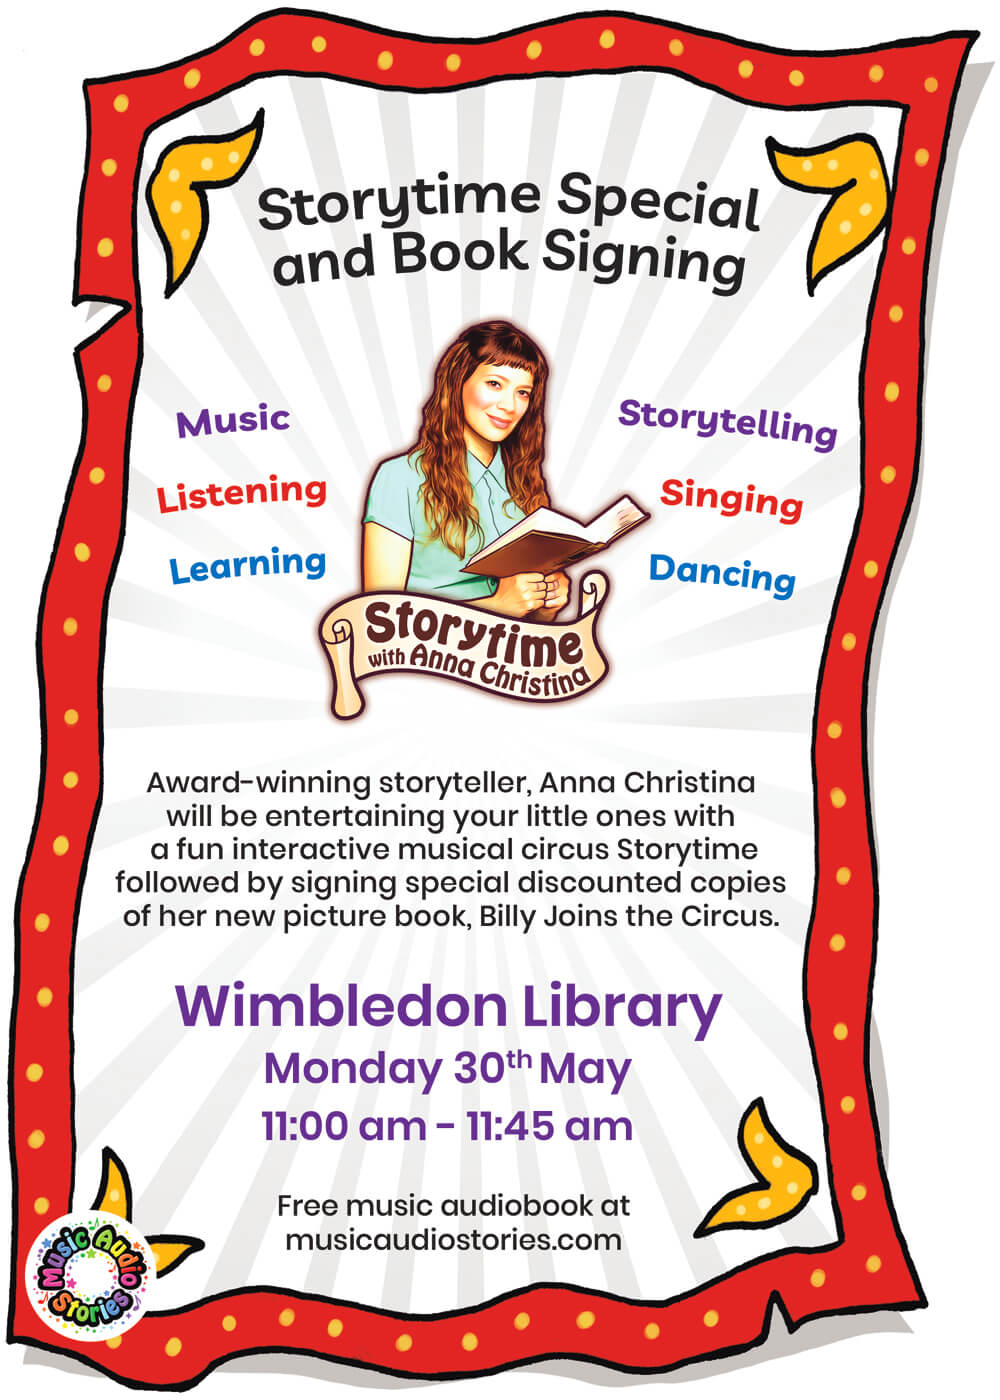 Billy Joins the Circus - Storytime Special with Anna Christina at Wimbledon Library